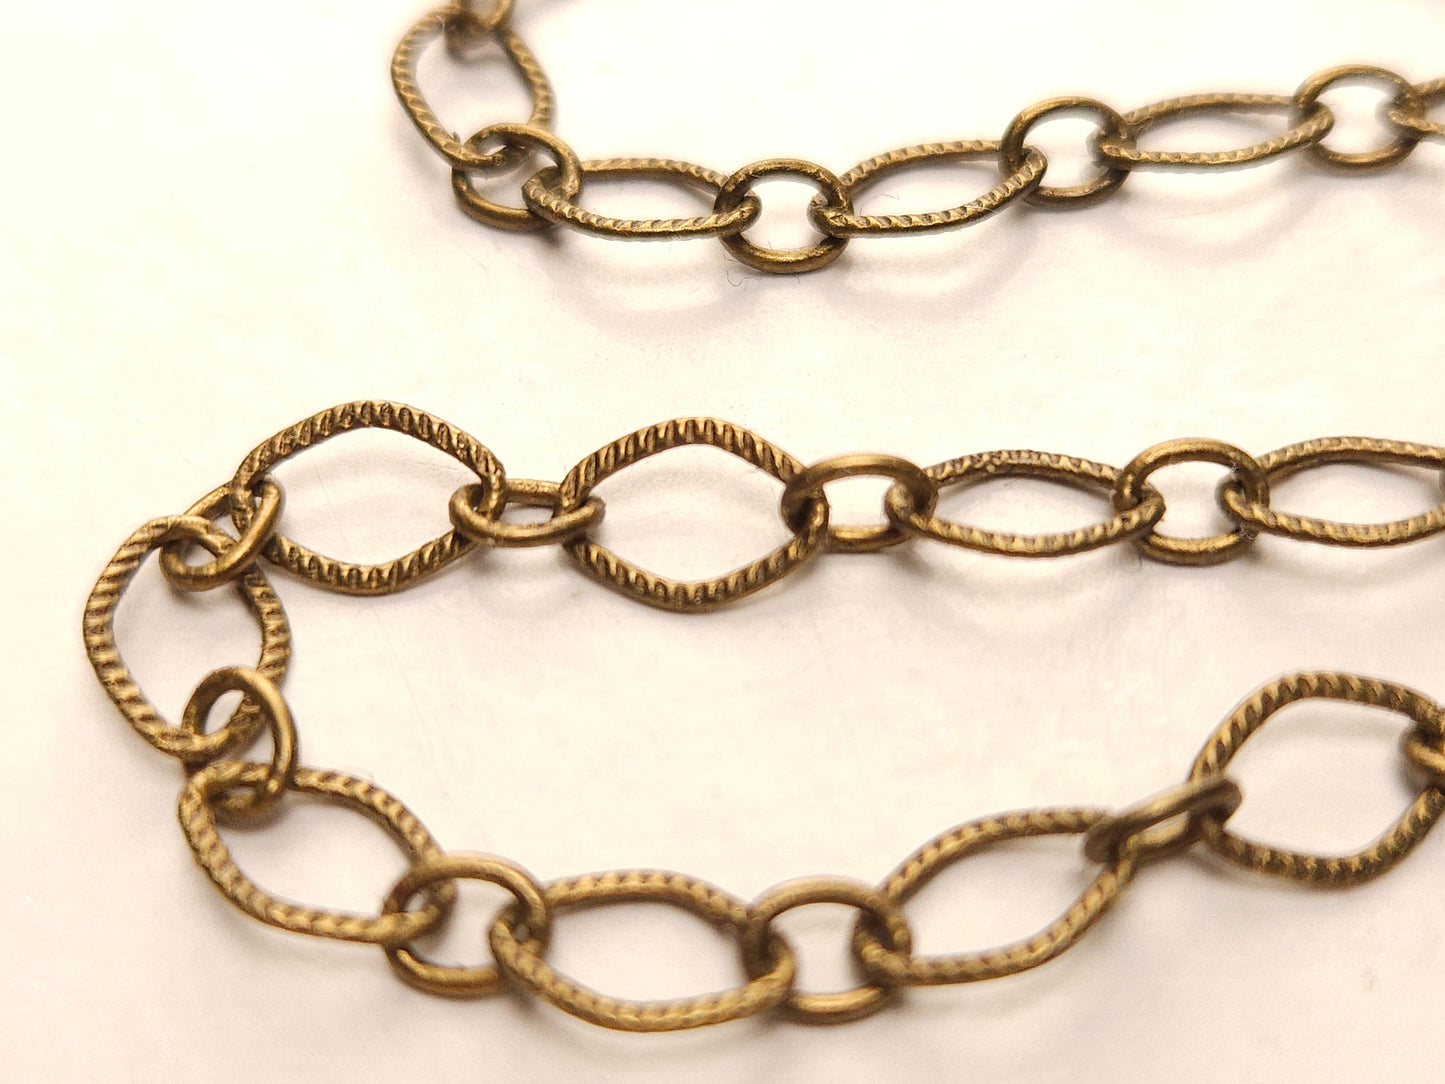 3 feet Black Gunmetal, Antique Brass chain for jewelry making supplies, oval link texture chain,sell by 1 yard, 36"